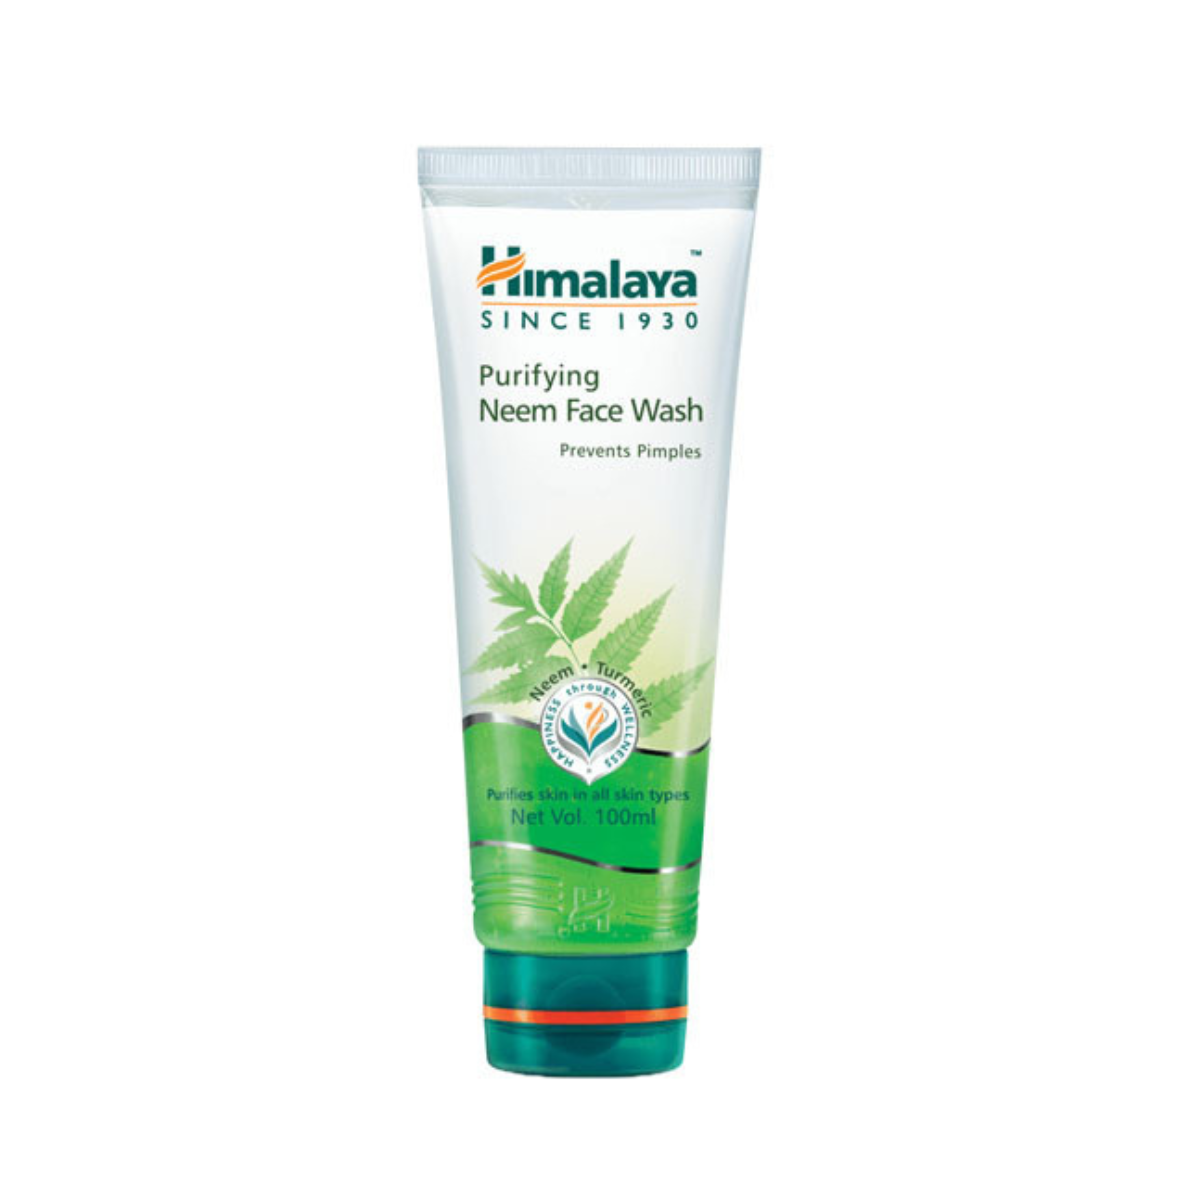 Himalaya Purifying Neem Face Wash - Prevents Pimples - Purifies Skin In All Skin Types - 100ml